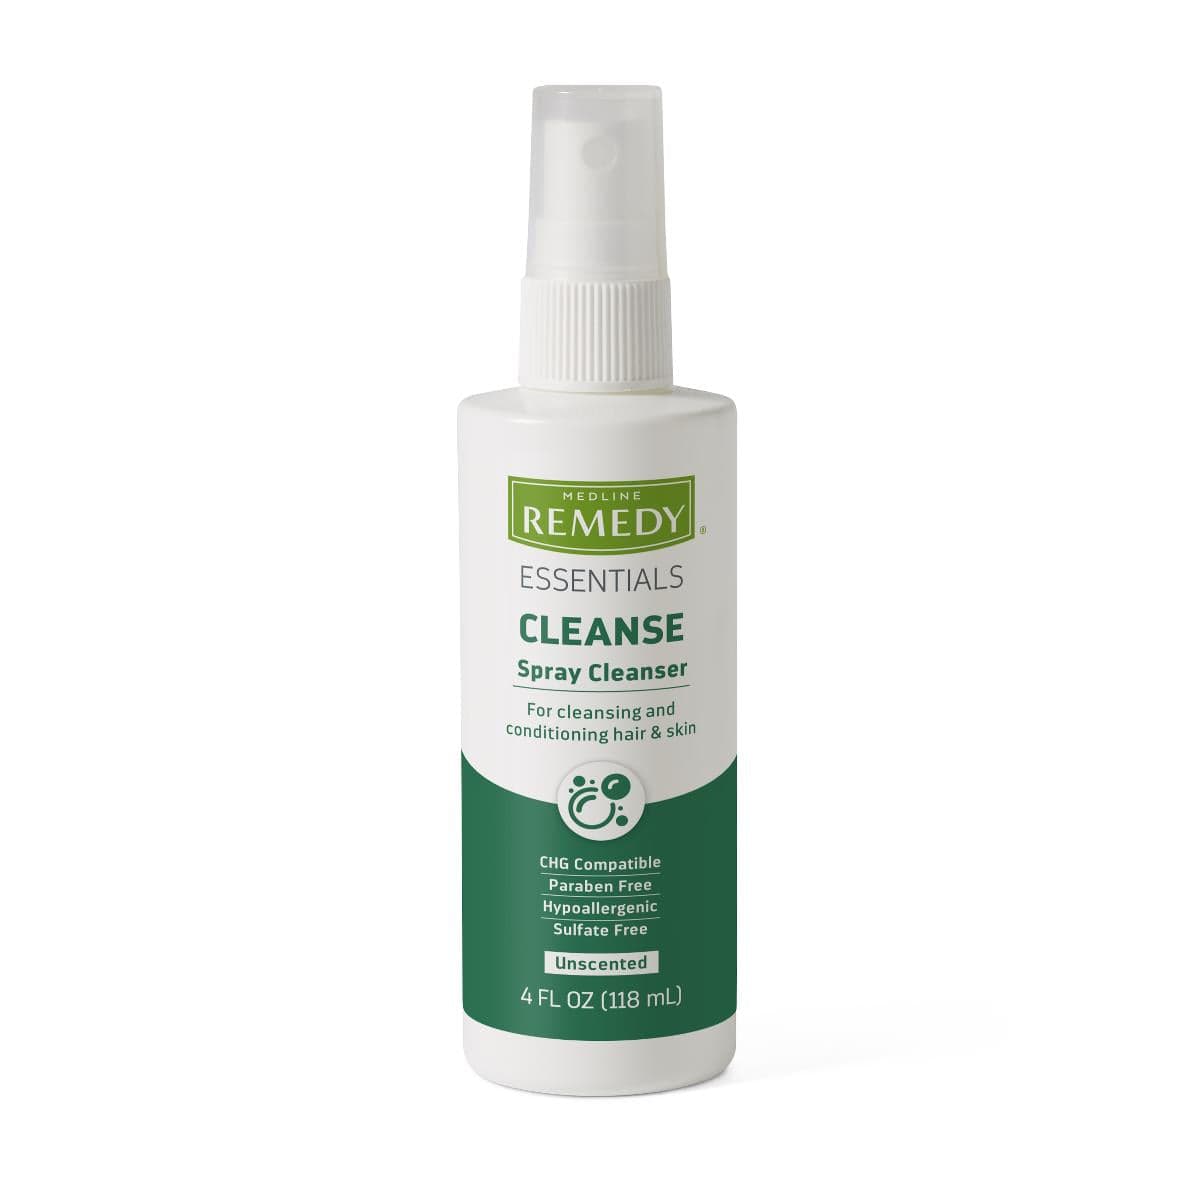 Medline Soothe & Cool No-Rinse Total Body Cleanser